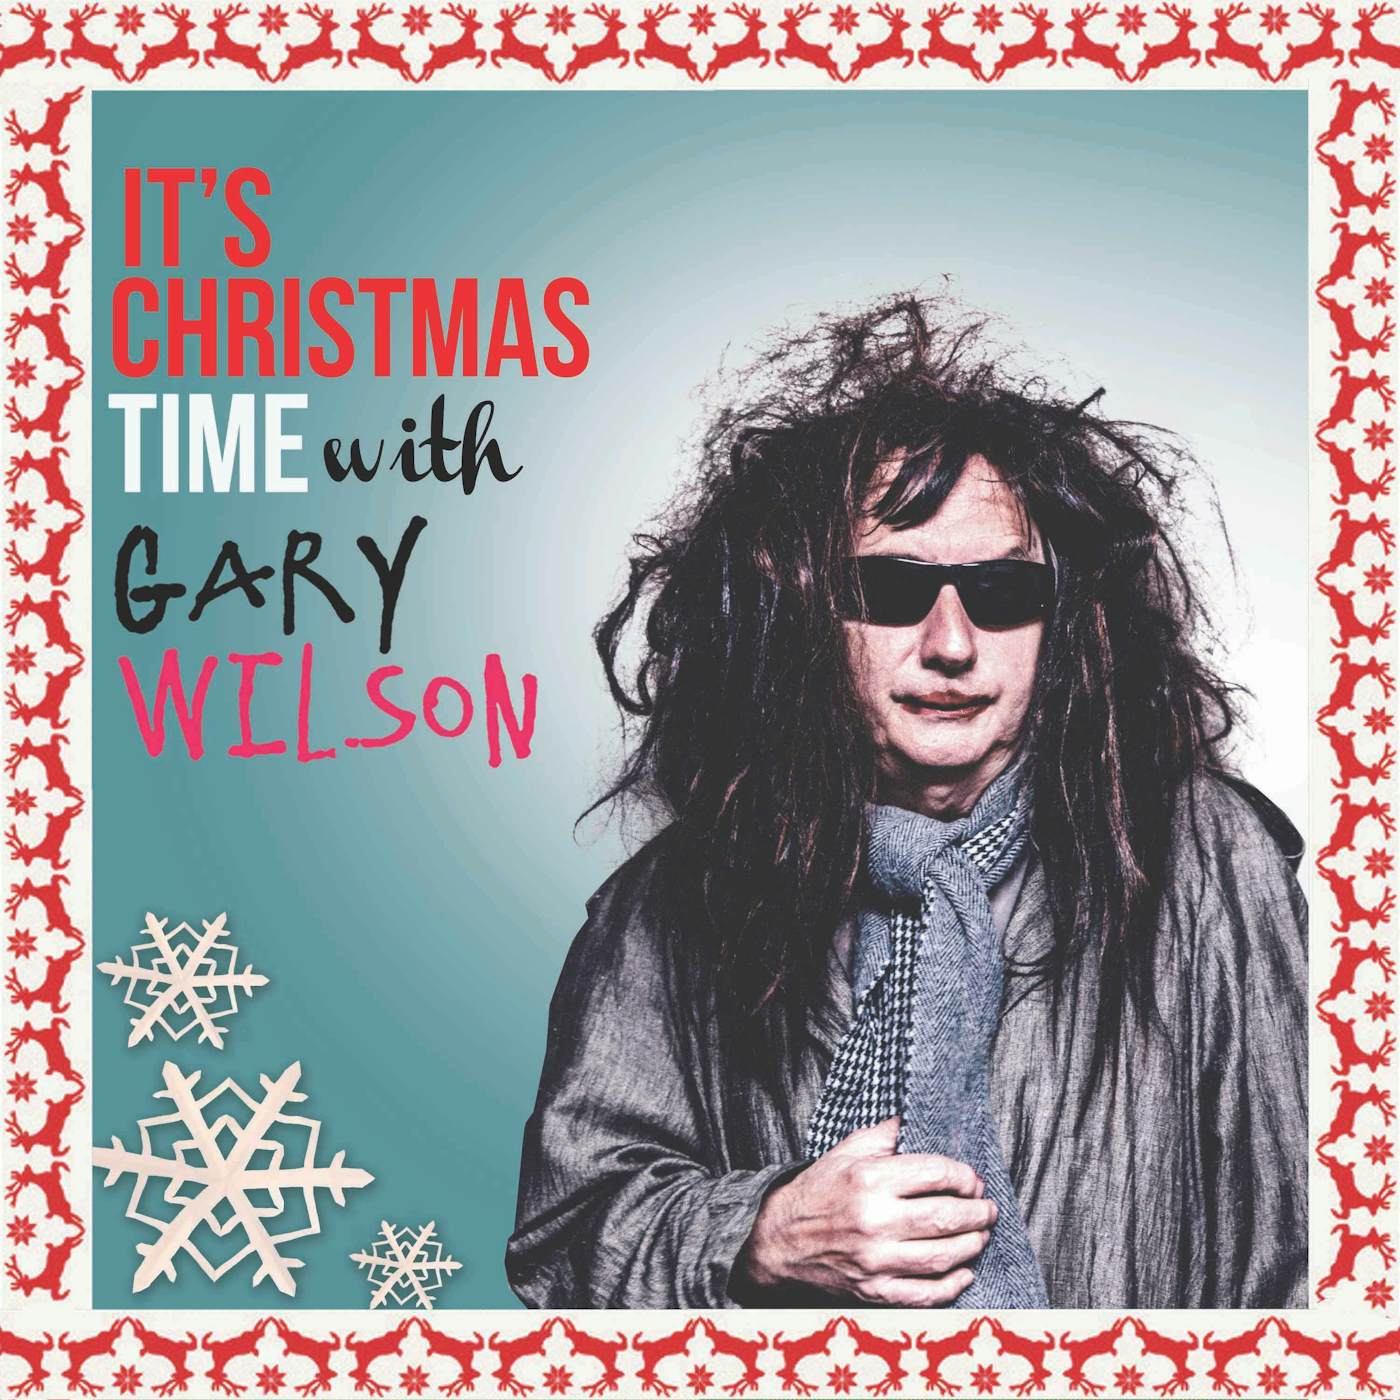 IT'S CHRISTMAS TIME WITH GARY WILSON CD